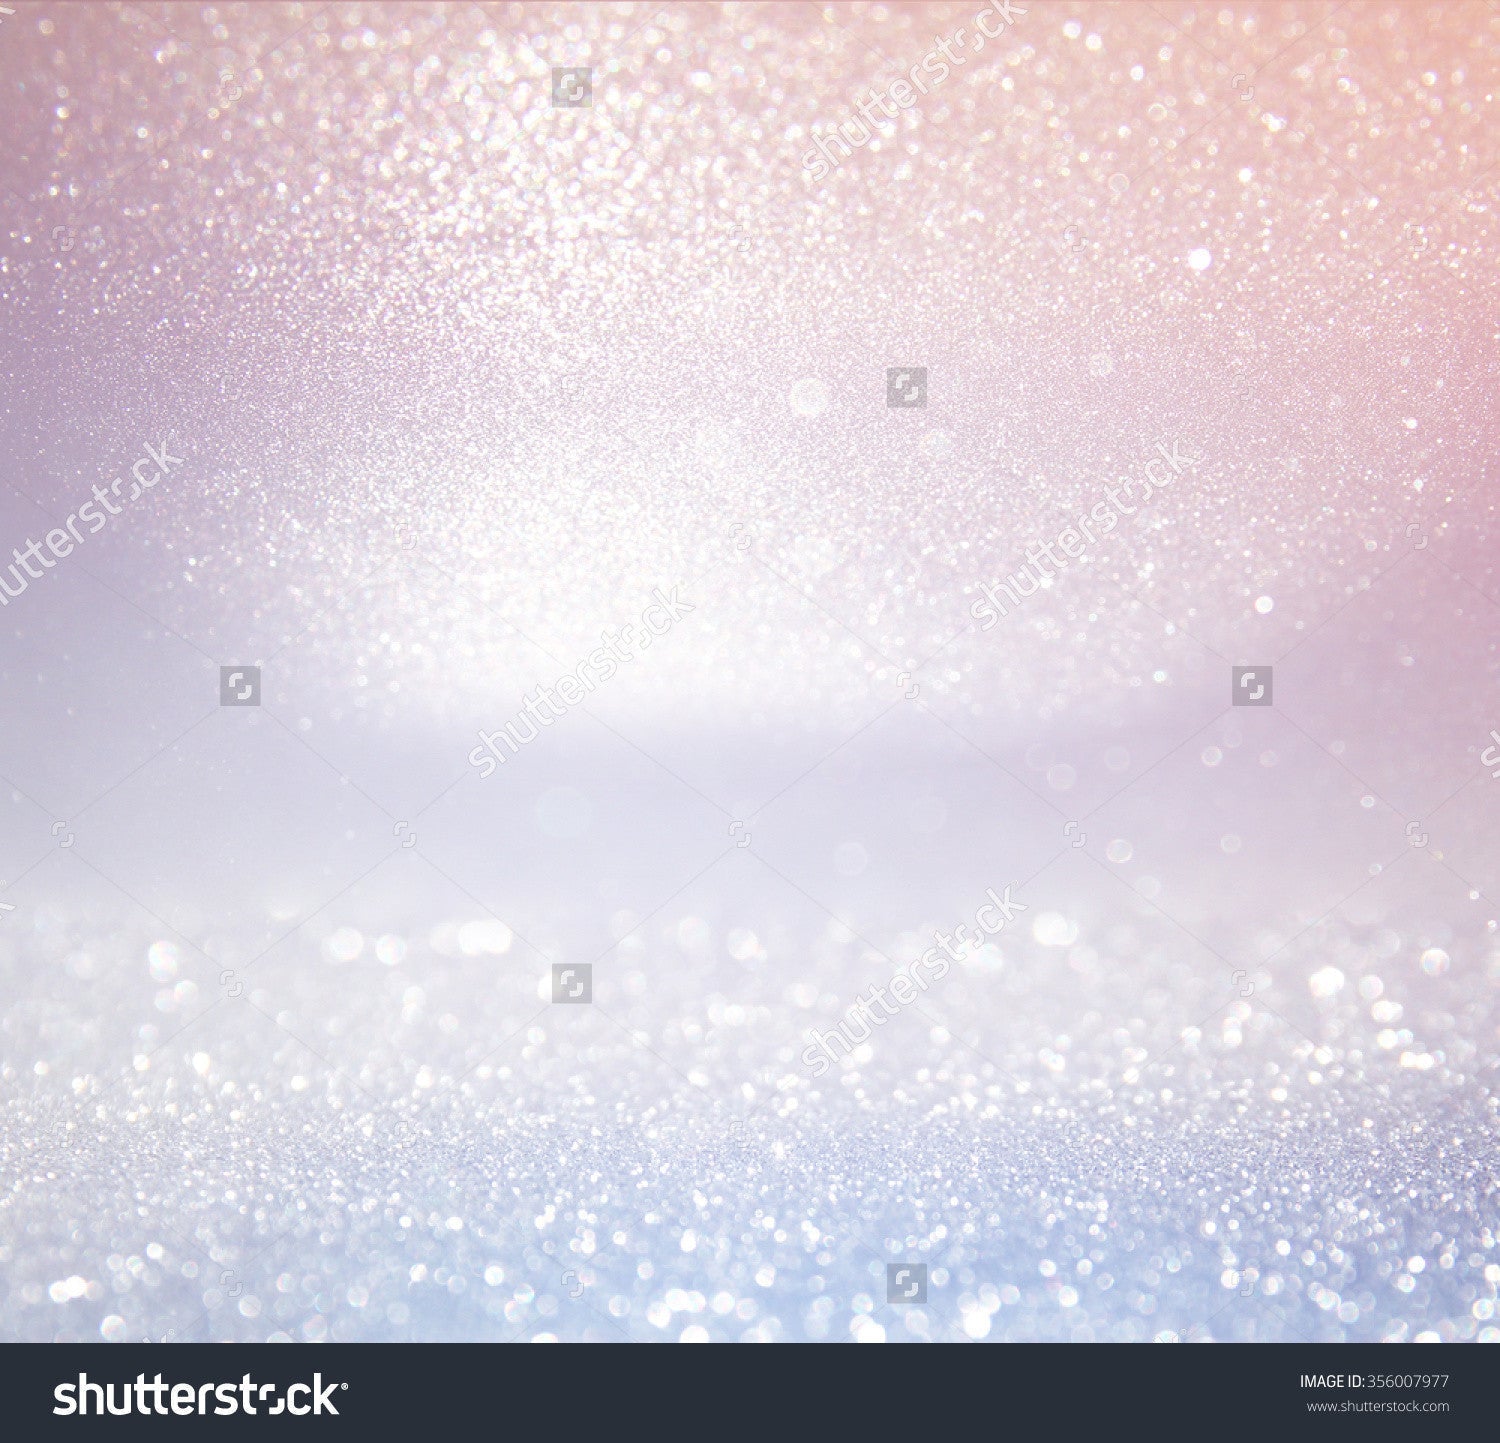 Light Silver and Pink Glitter Print Photography Backdrop